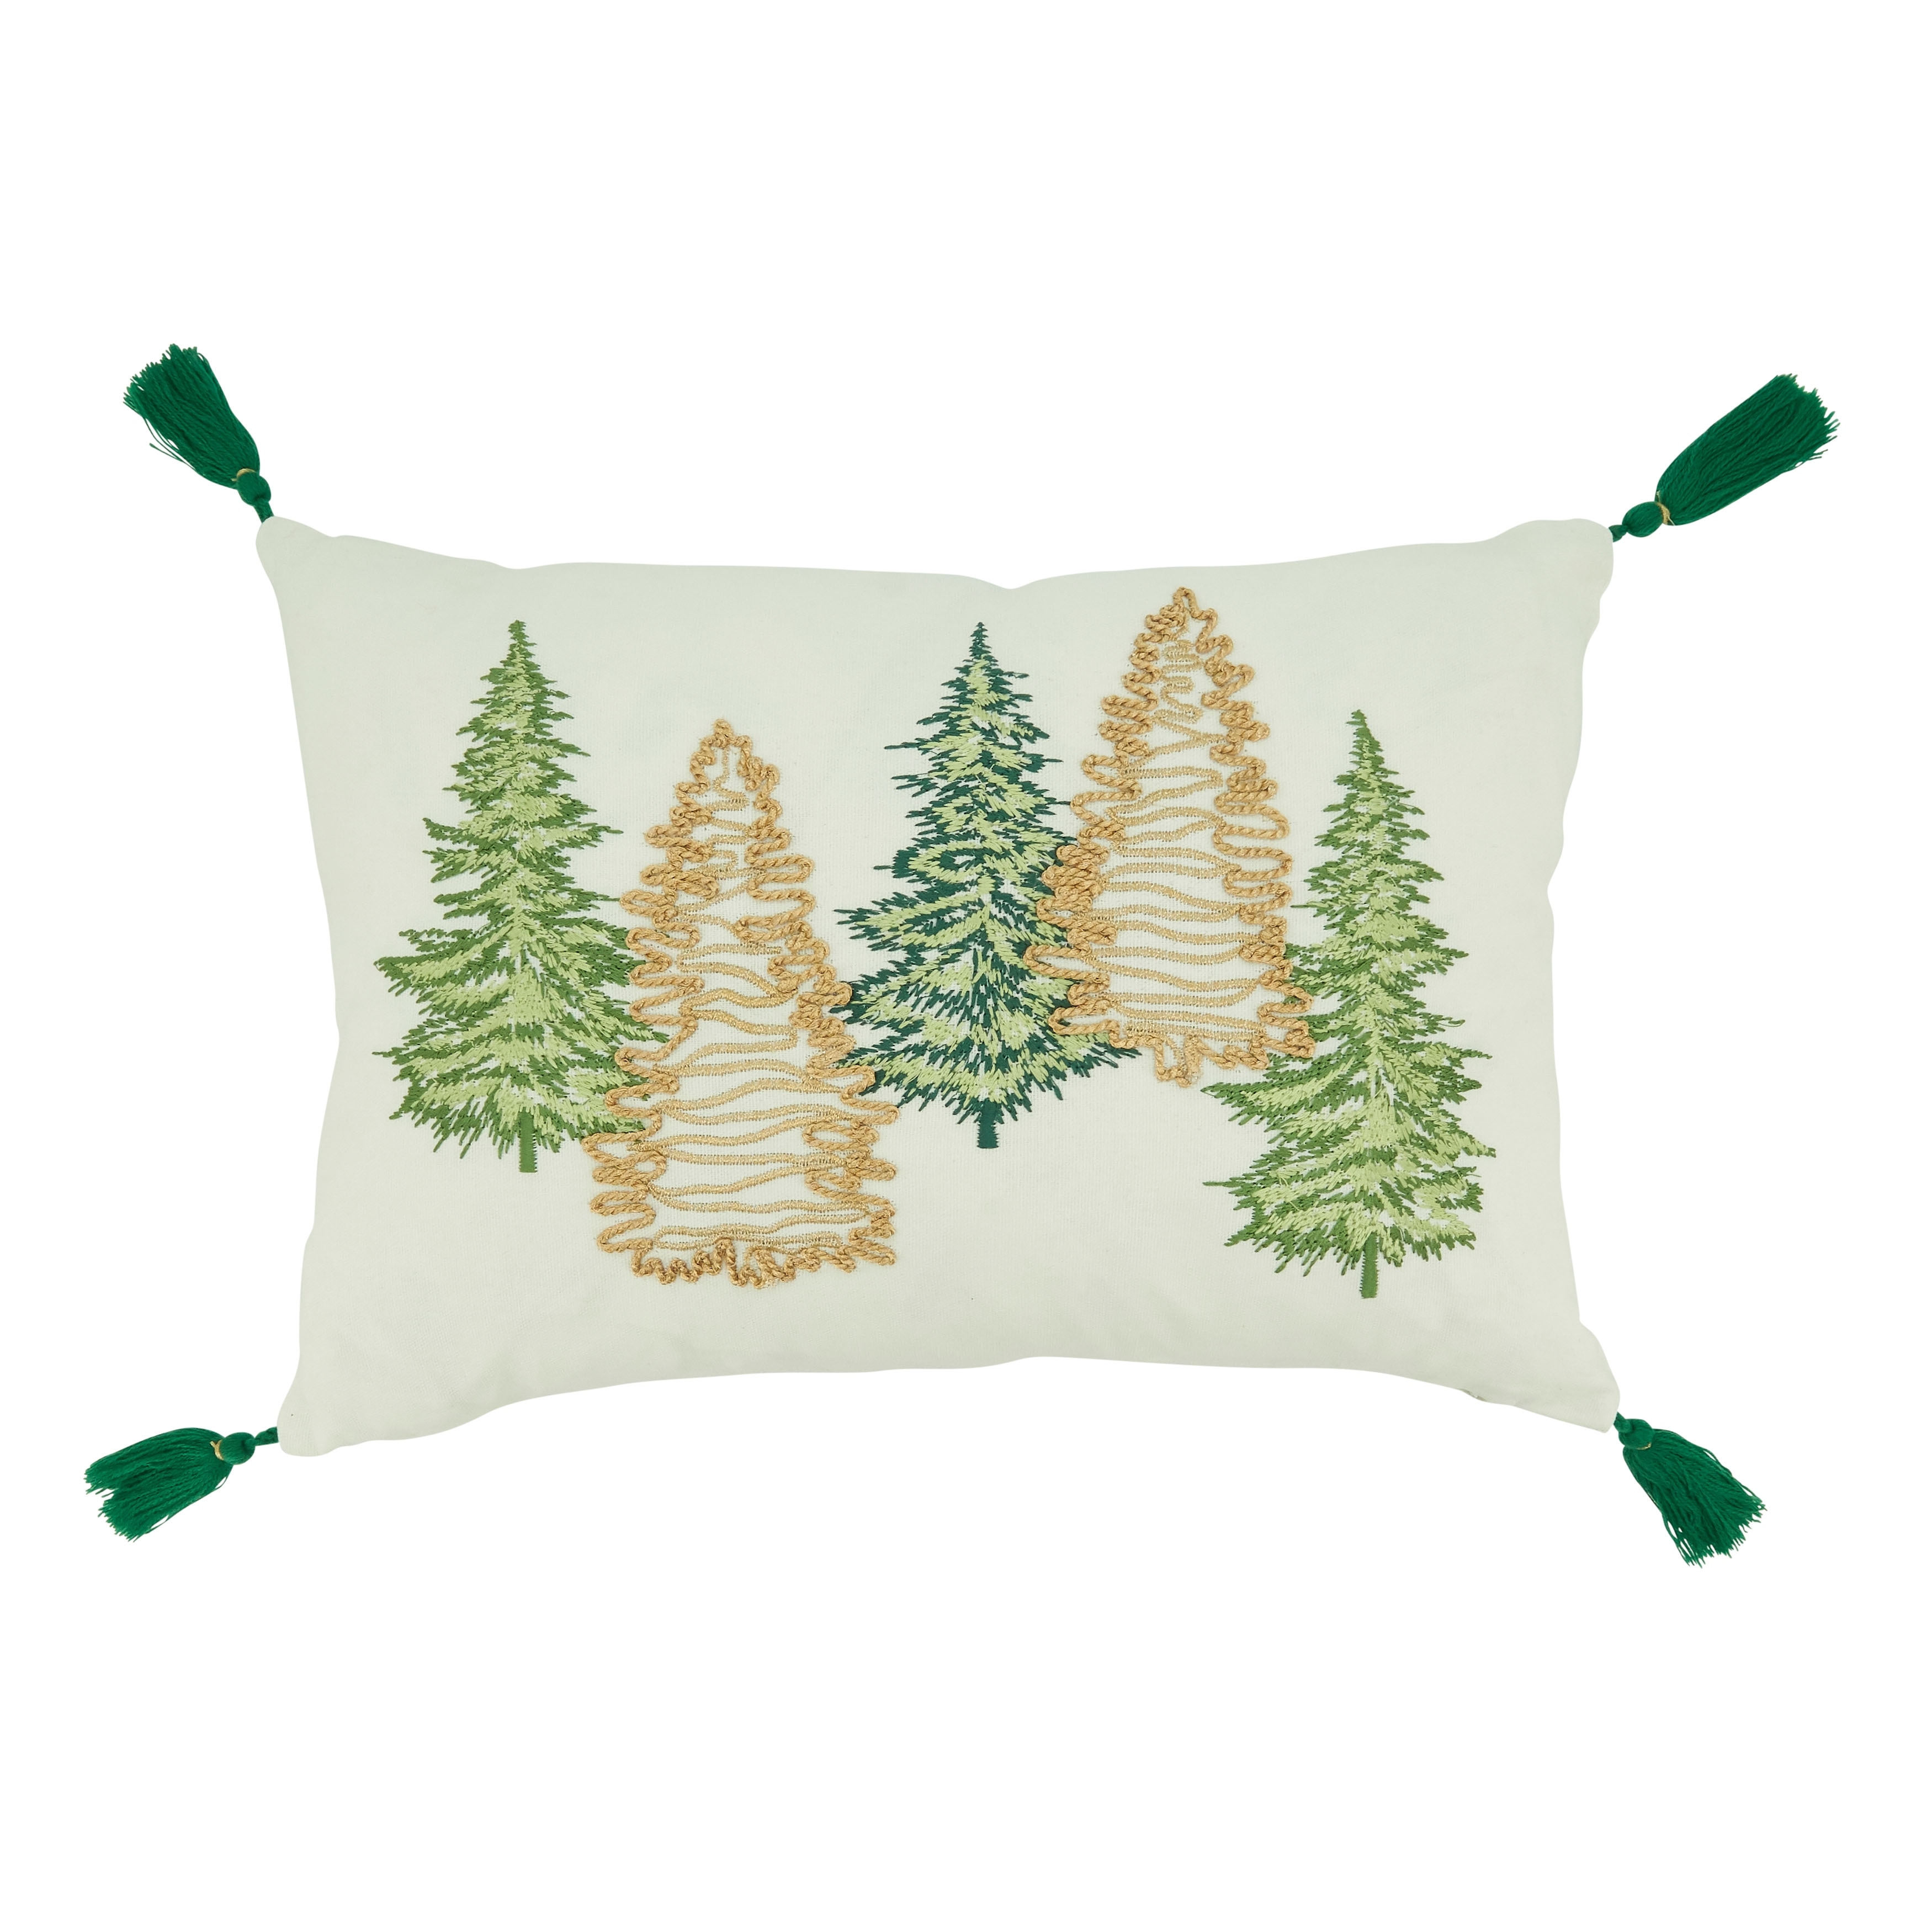 https://ak1.ostkcdn.com/images/products/is/images/direct/6fc5fe2ec7bd1af5153e59bb173288fce68c778a/Throw-Pillow-With-Christmas-Trees-Design.jpg